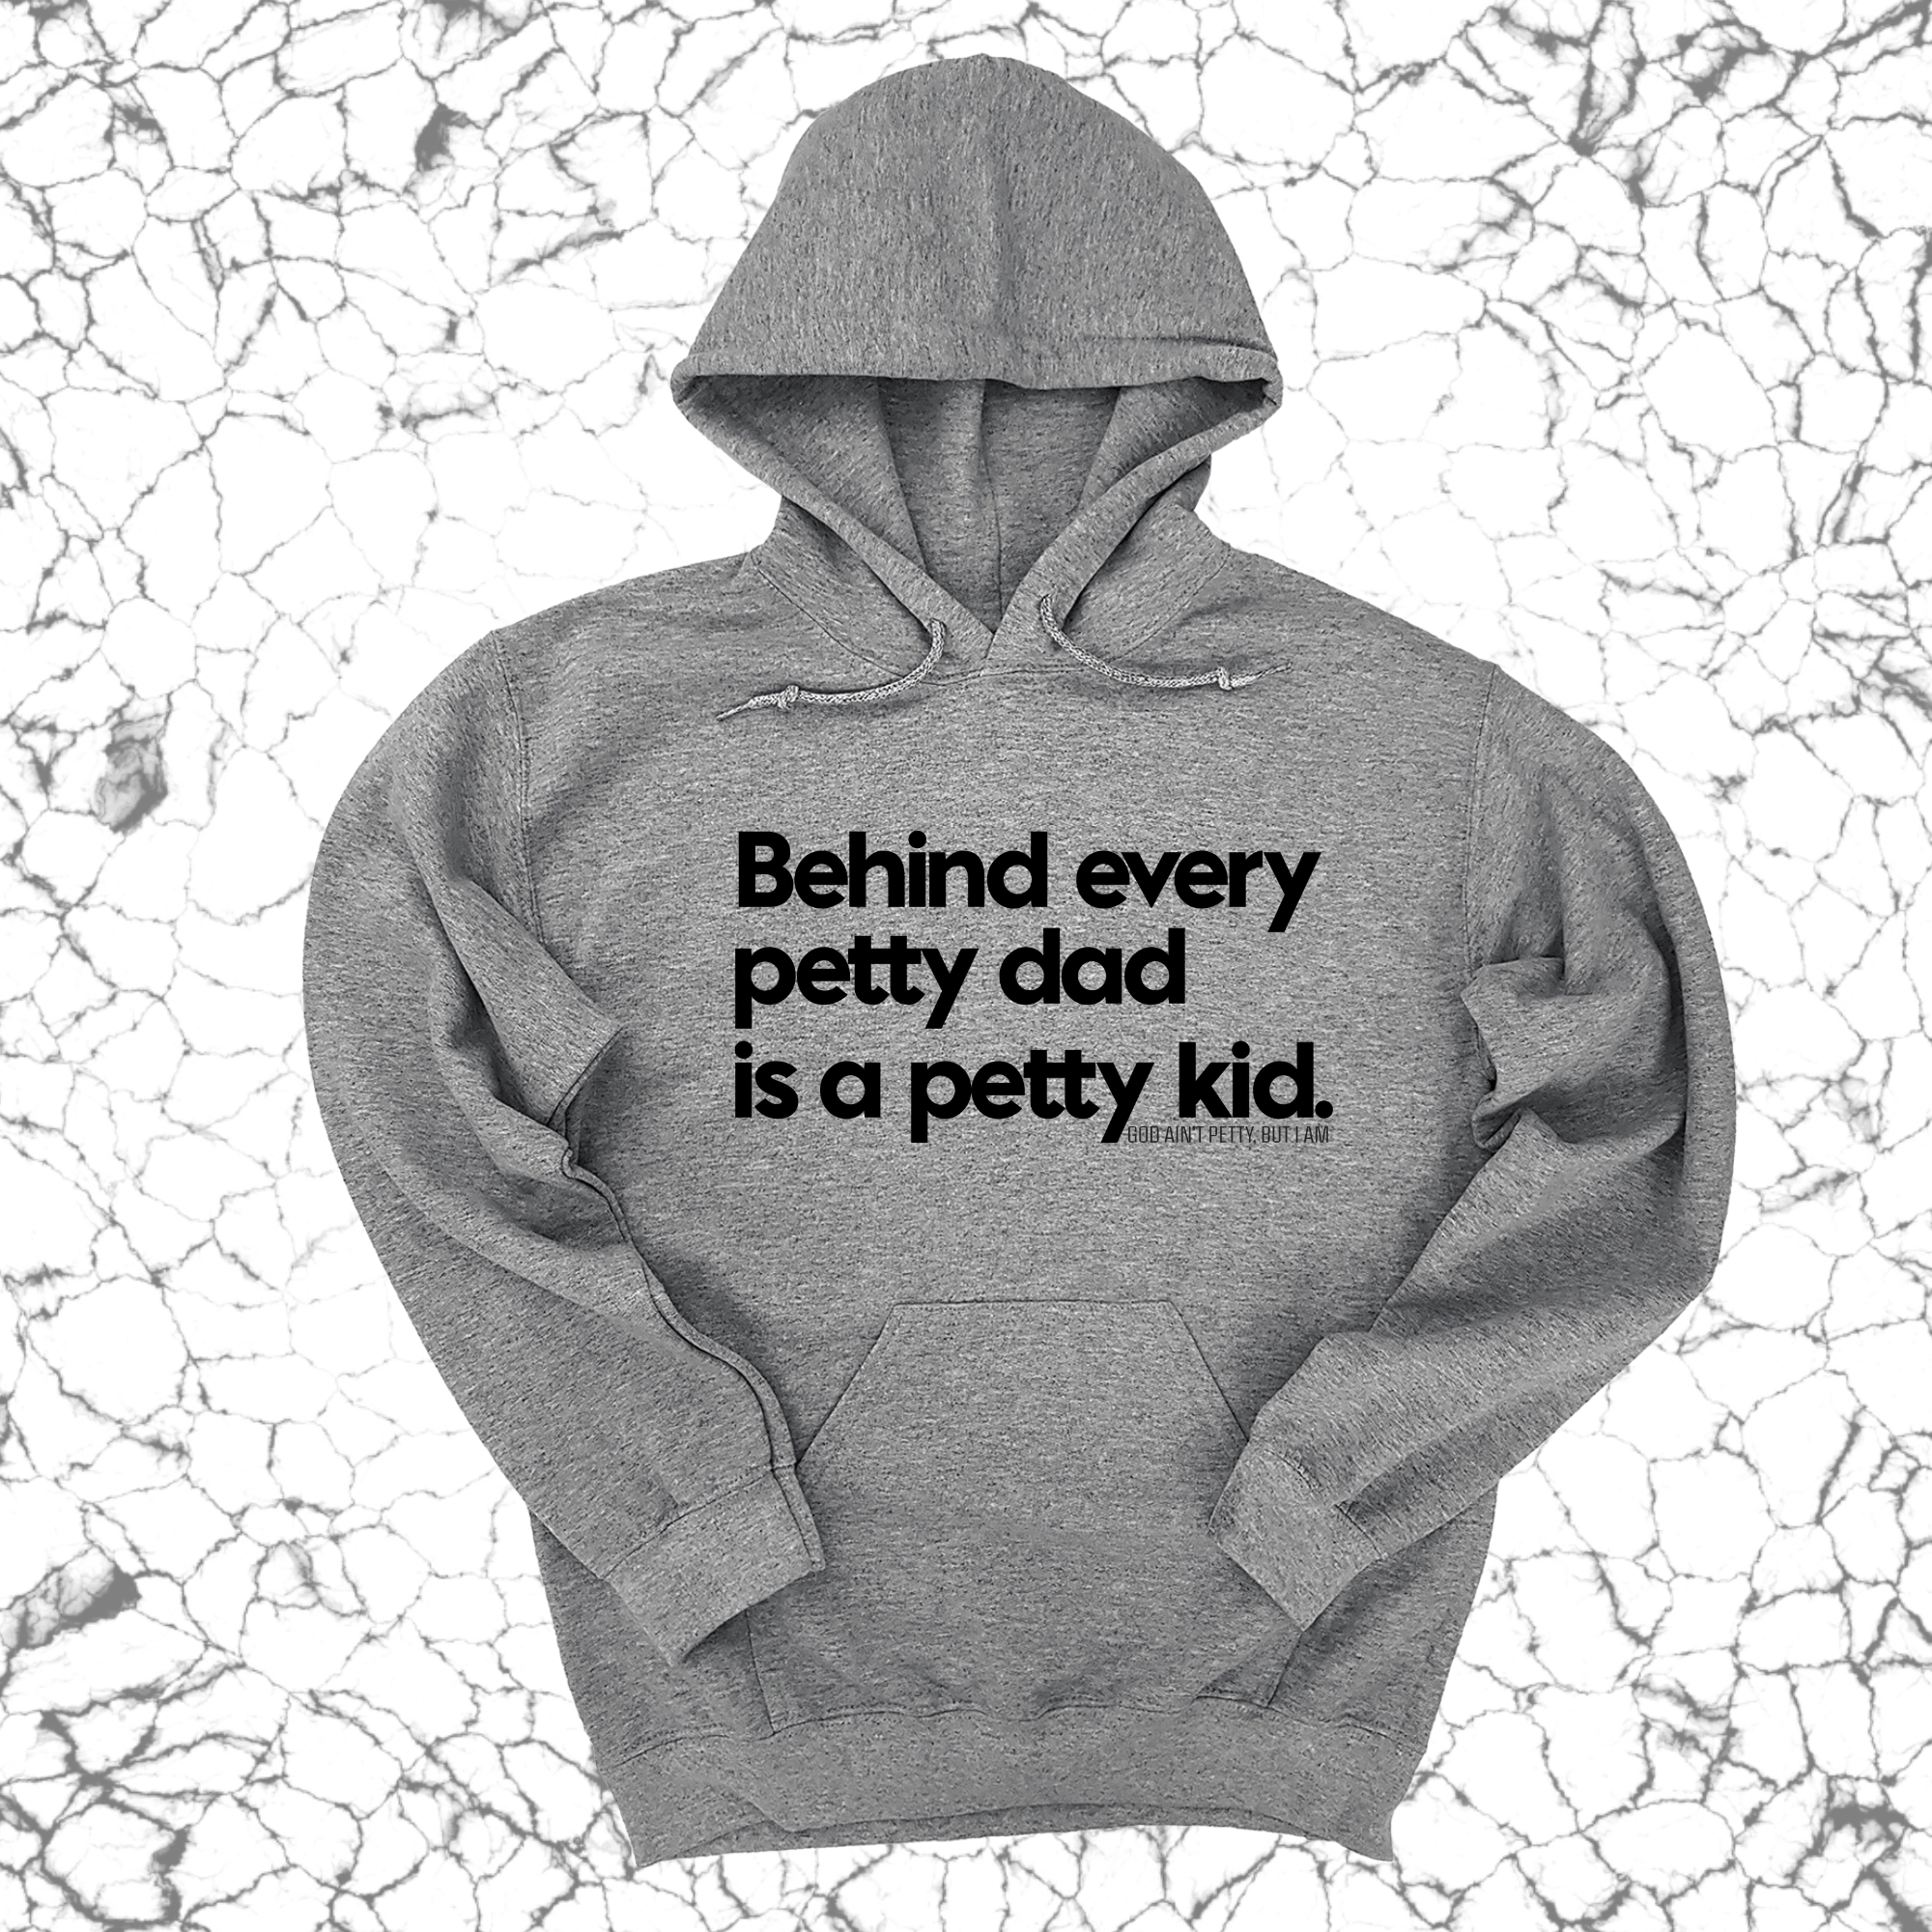 Behind every petty dad is a petty kid Unisex Hoodie-Hoodie-The Original God Ain't Petty But I Am